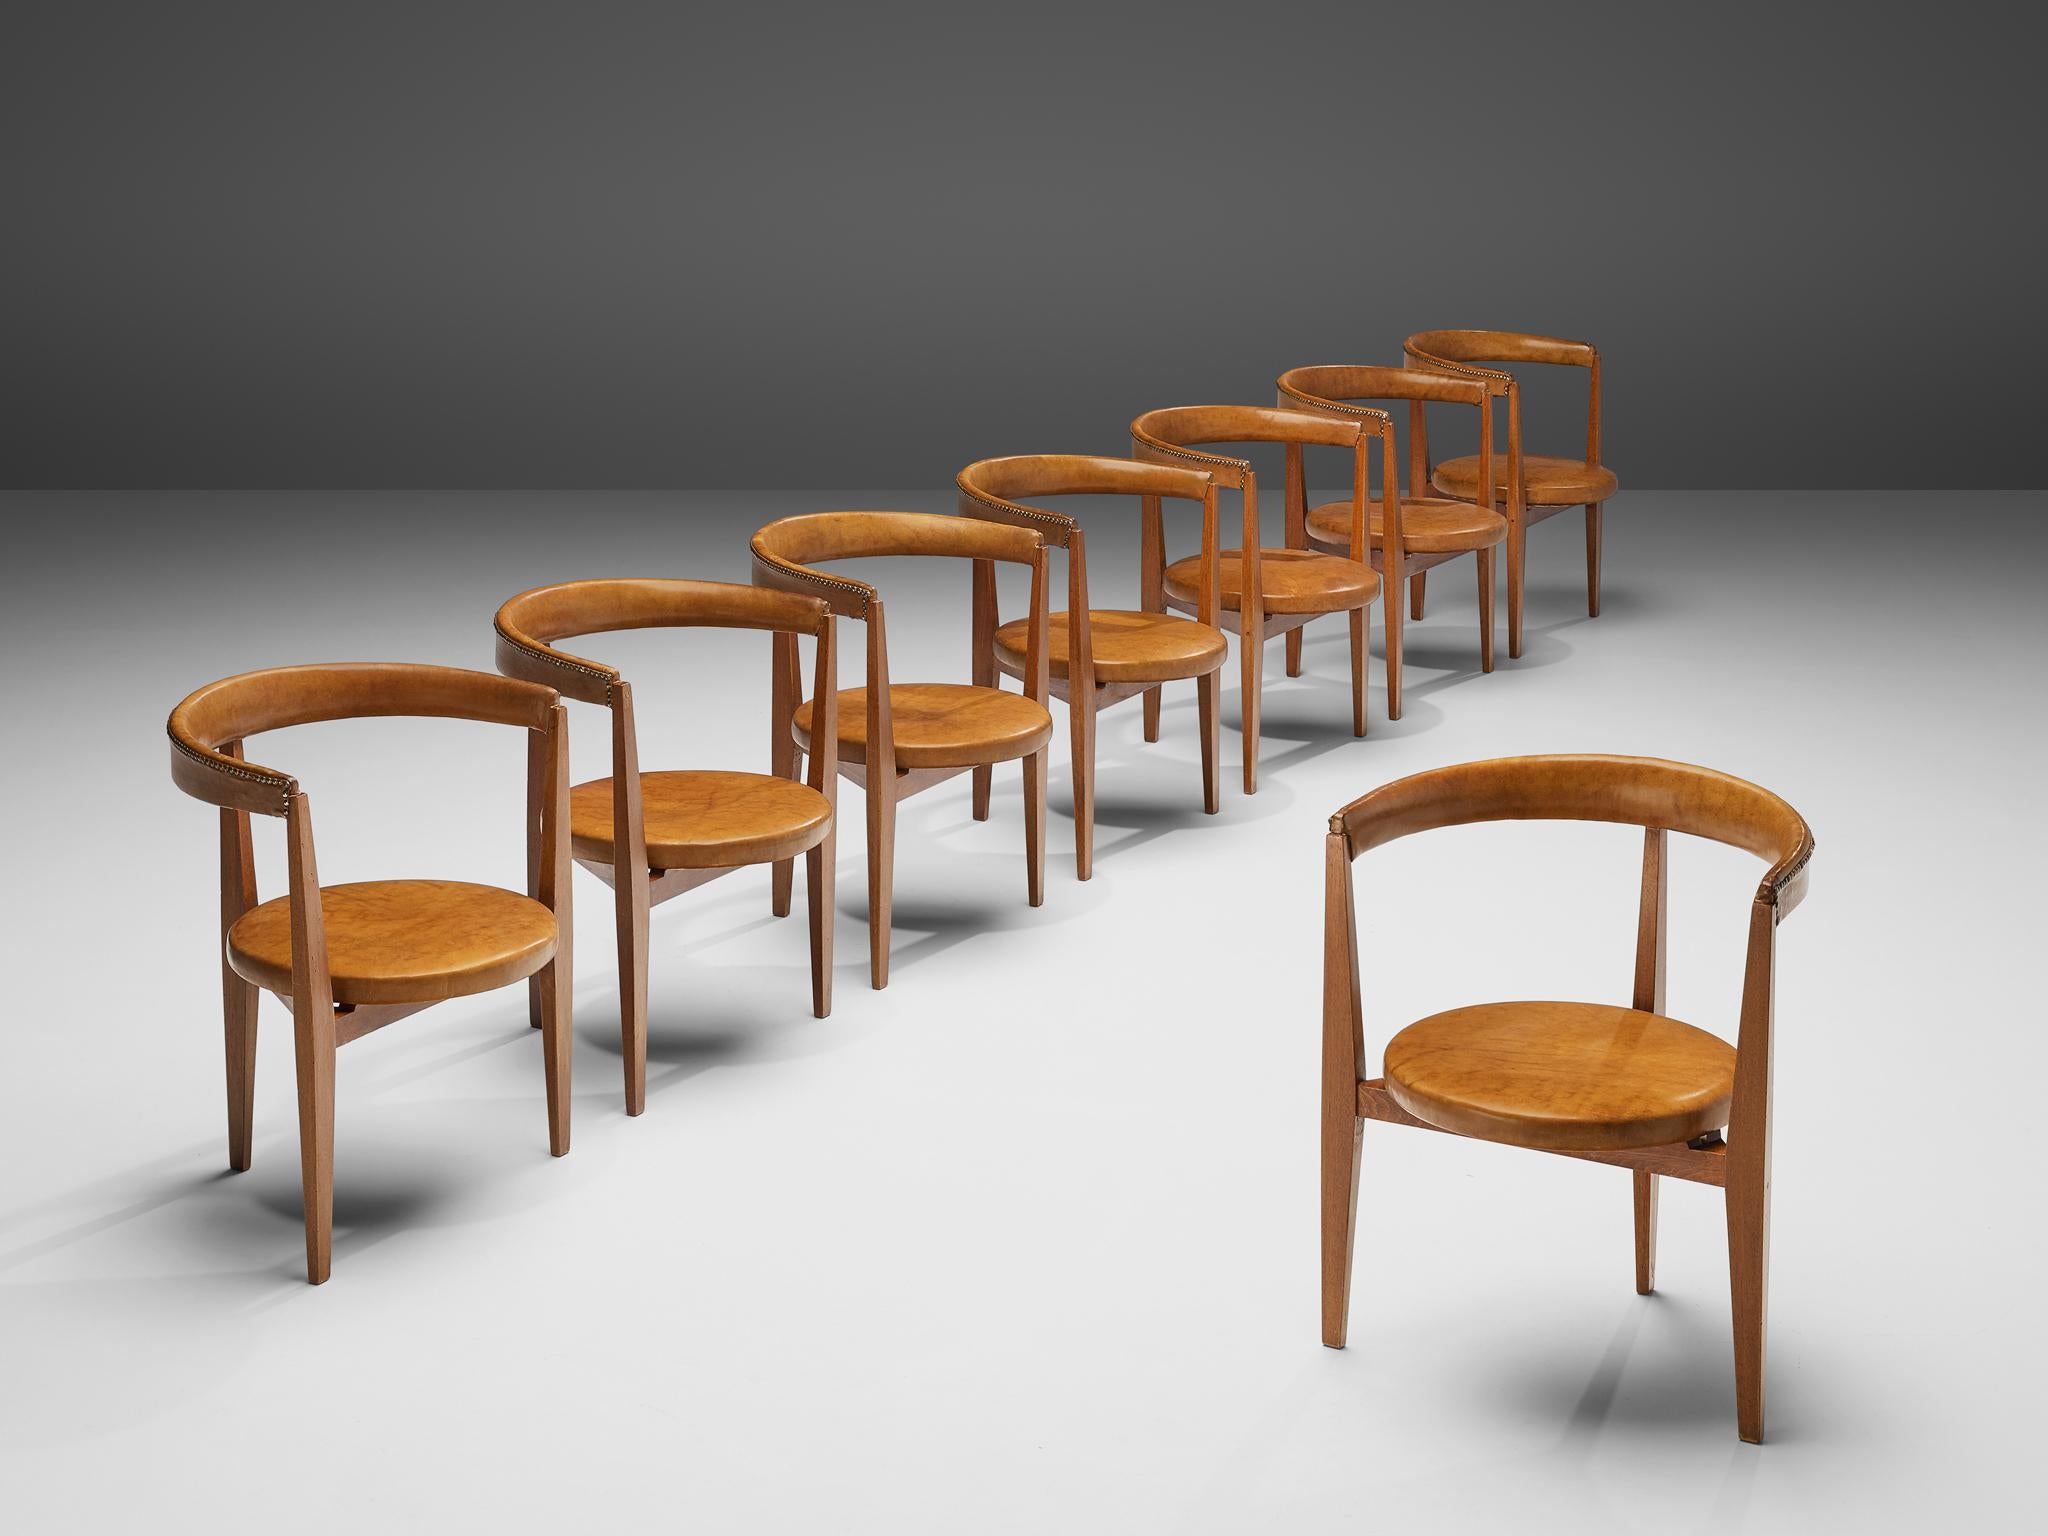 Guido Canali, set of eight dining chairs, walnut, leather, brass, Italy, 1960s

This set is one of the rare furniture designs by the architect Guido Canali (born 1935). The chairs, designed by Canali at the early stages of his career, were inspired